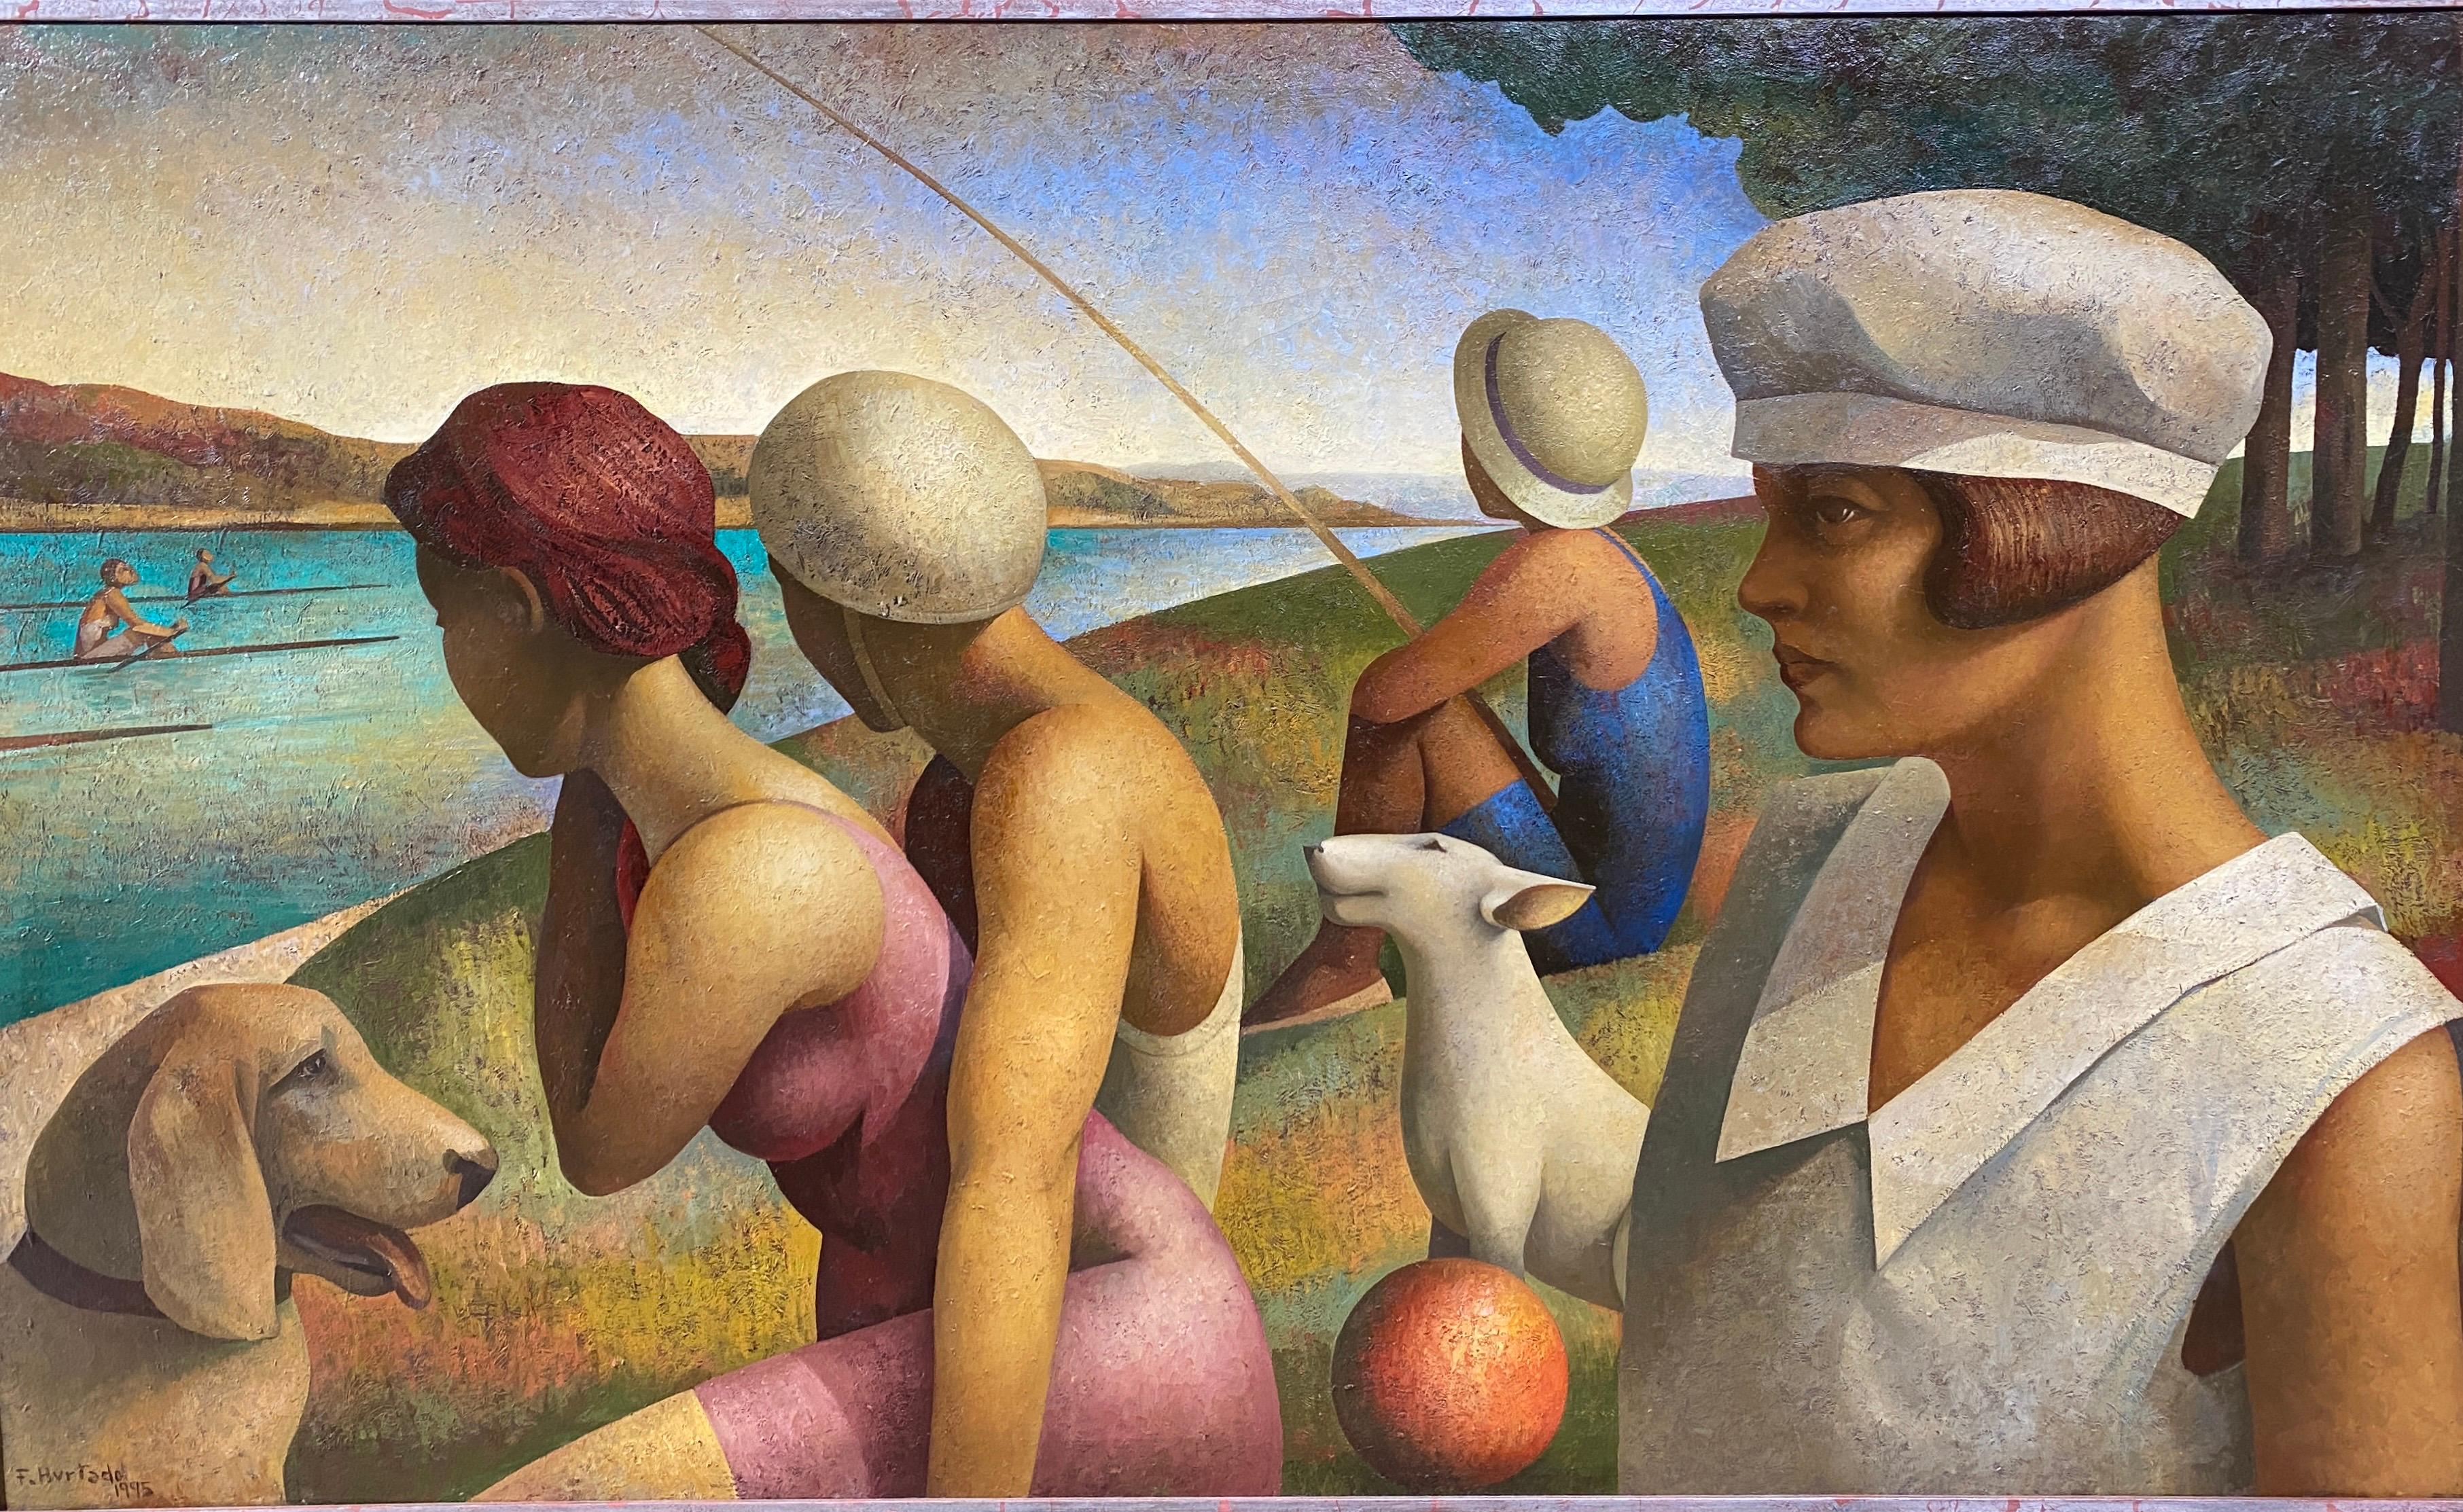 Regattas day (a tribute to Seurat). Large format Riverside scene with figures.  - Painting by Fabio Hurtado